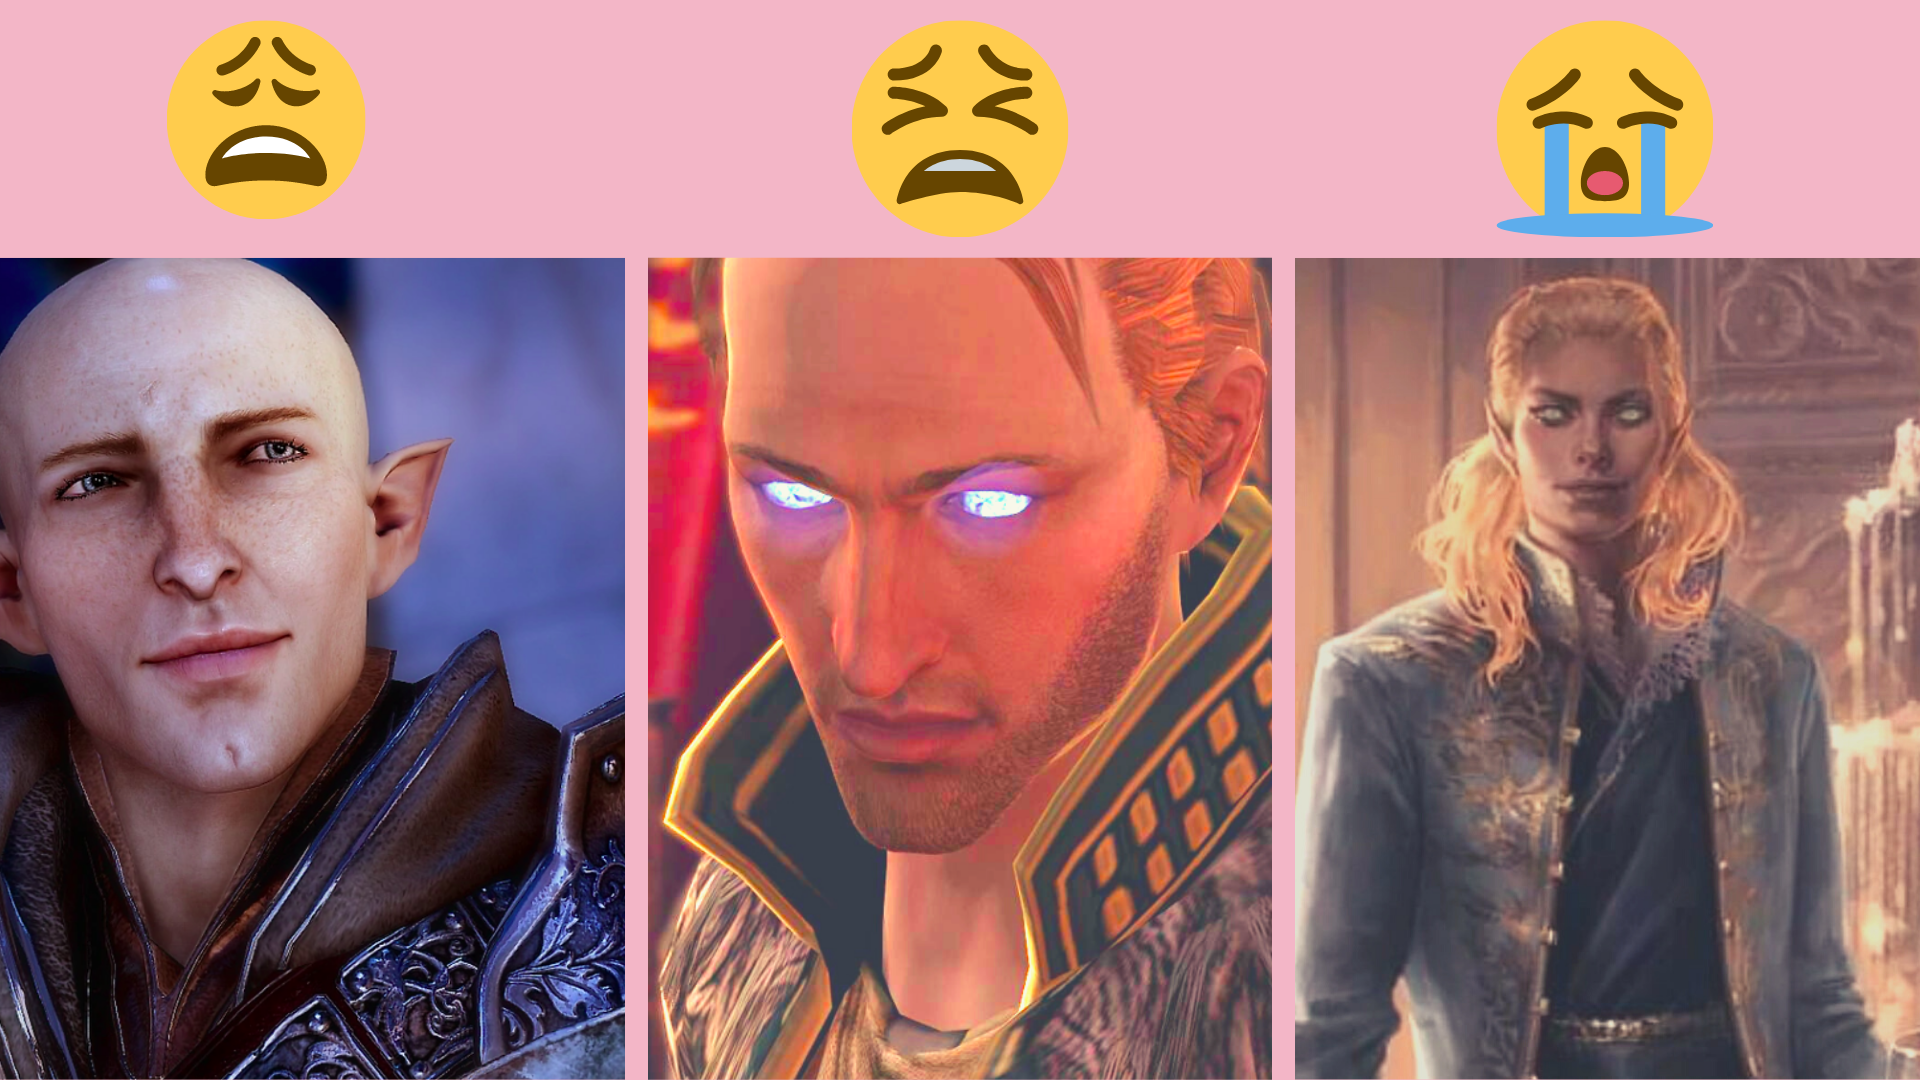 5 gremlin romance options in video games that I can't help but romance